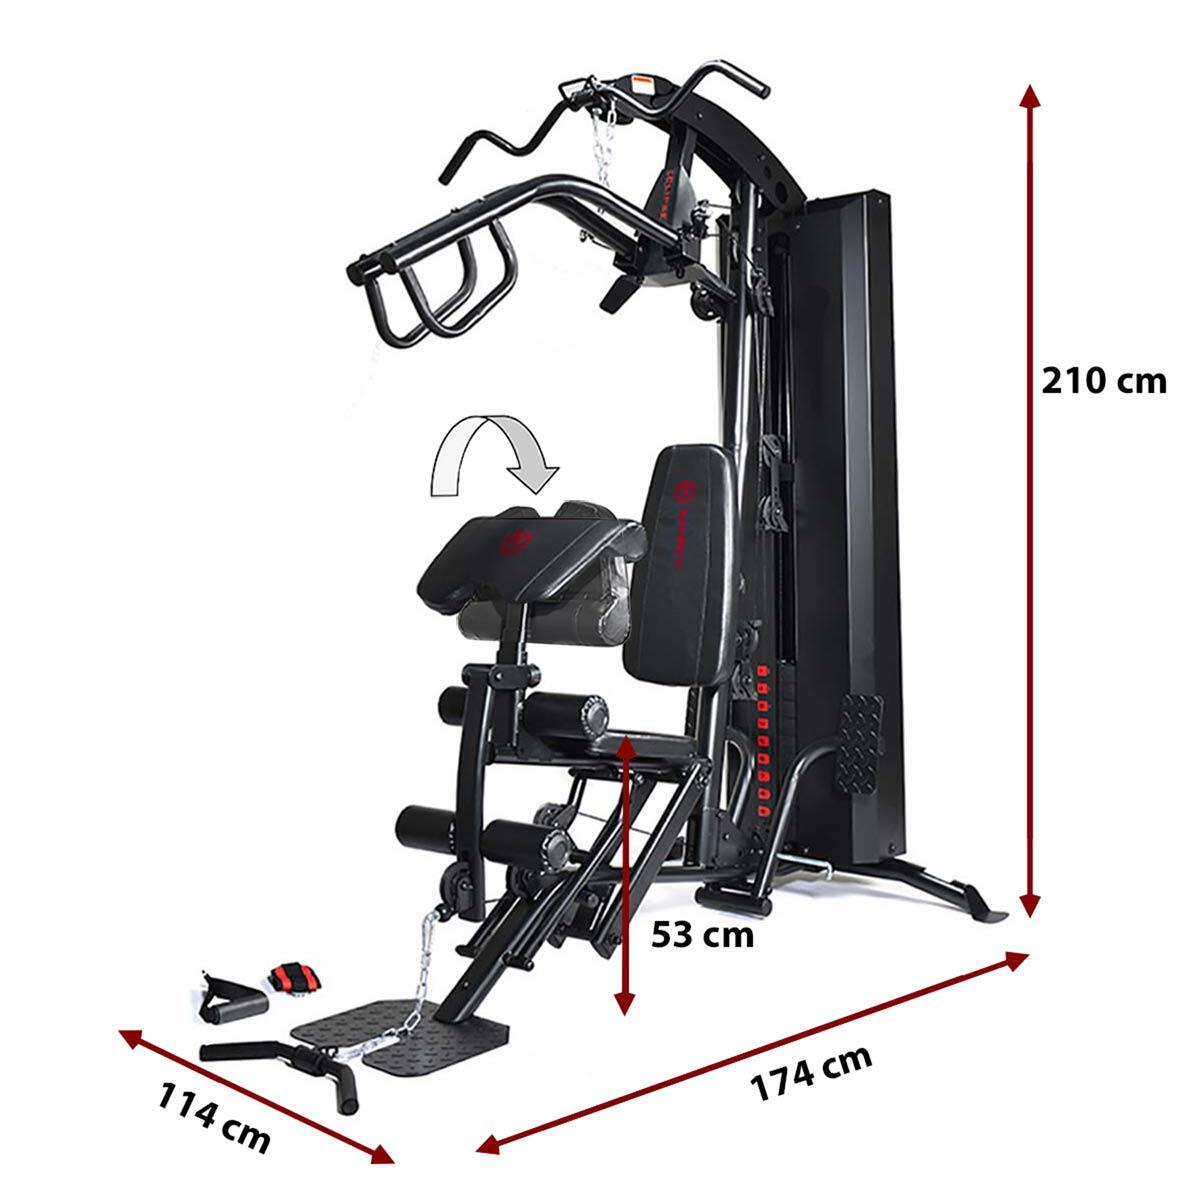 MARCY ECLIPSE HG7000 HOME MULTI GYM WITH INTEGRATED LEG PRESS 6/6